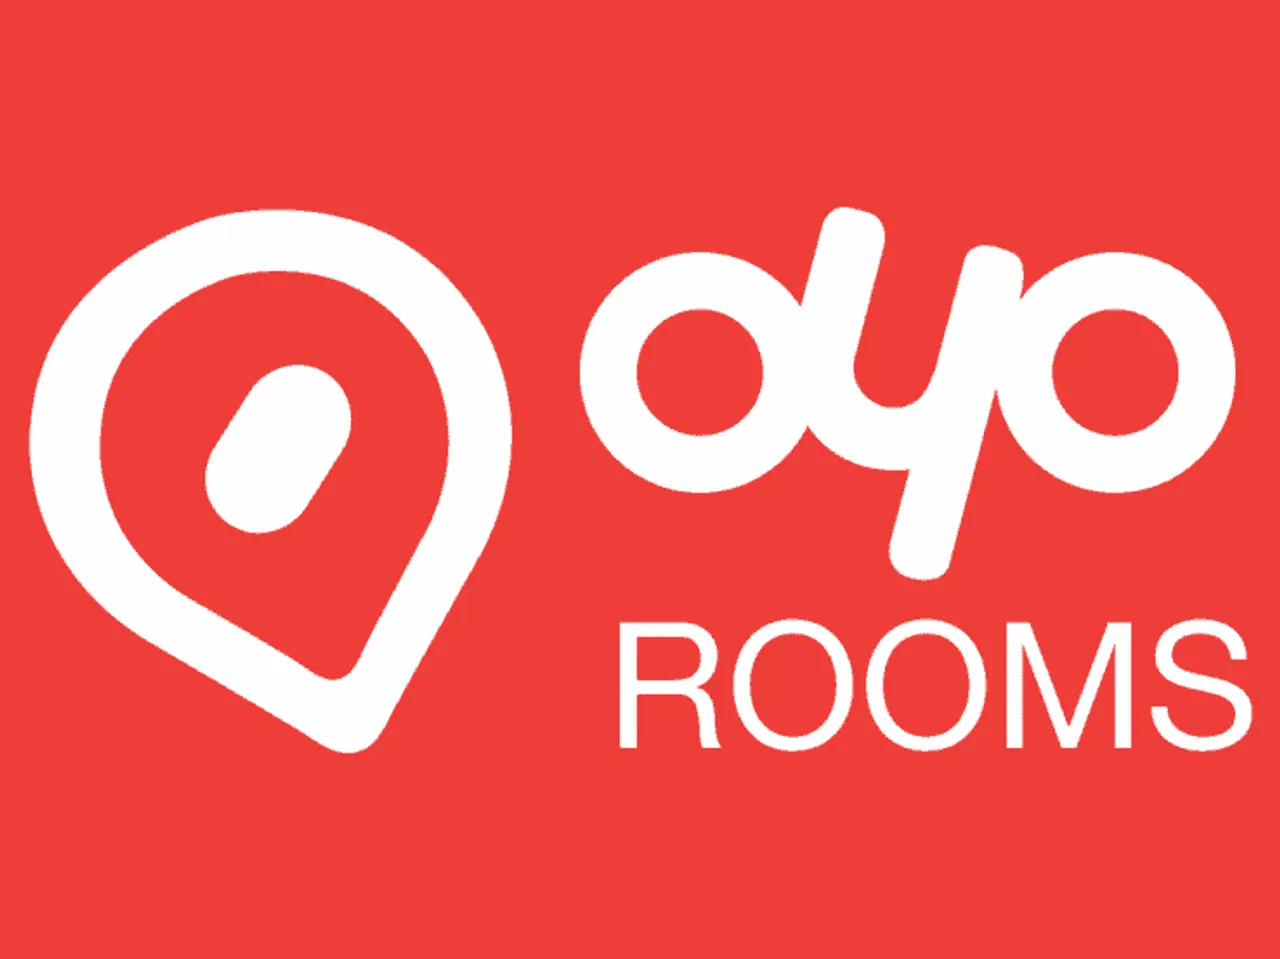 OYO Hotels & Homes has announced the acquisition of Danamica, a Copenhagen-based data science company